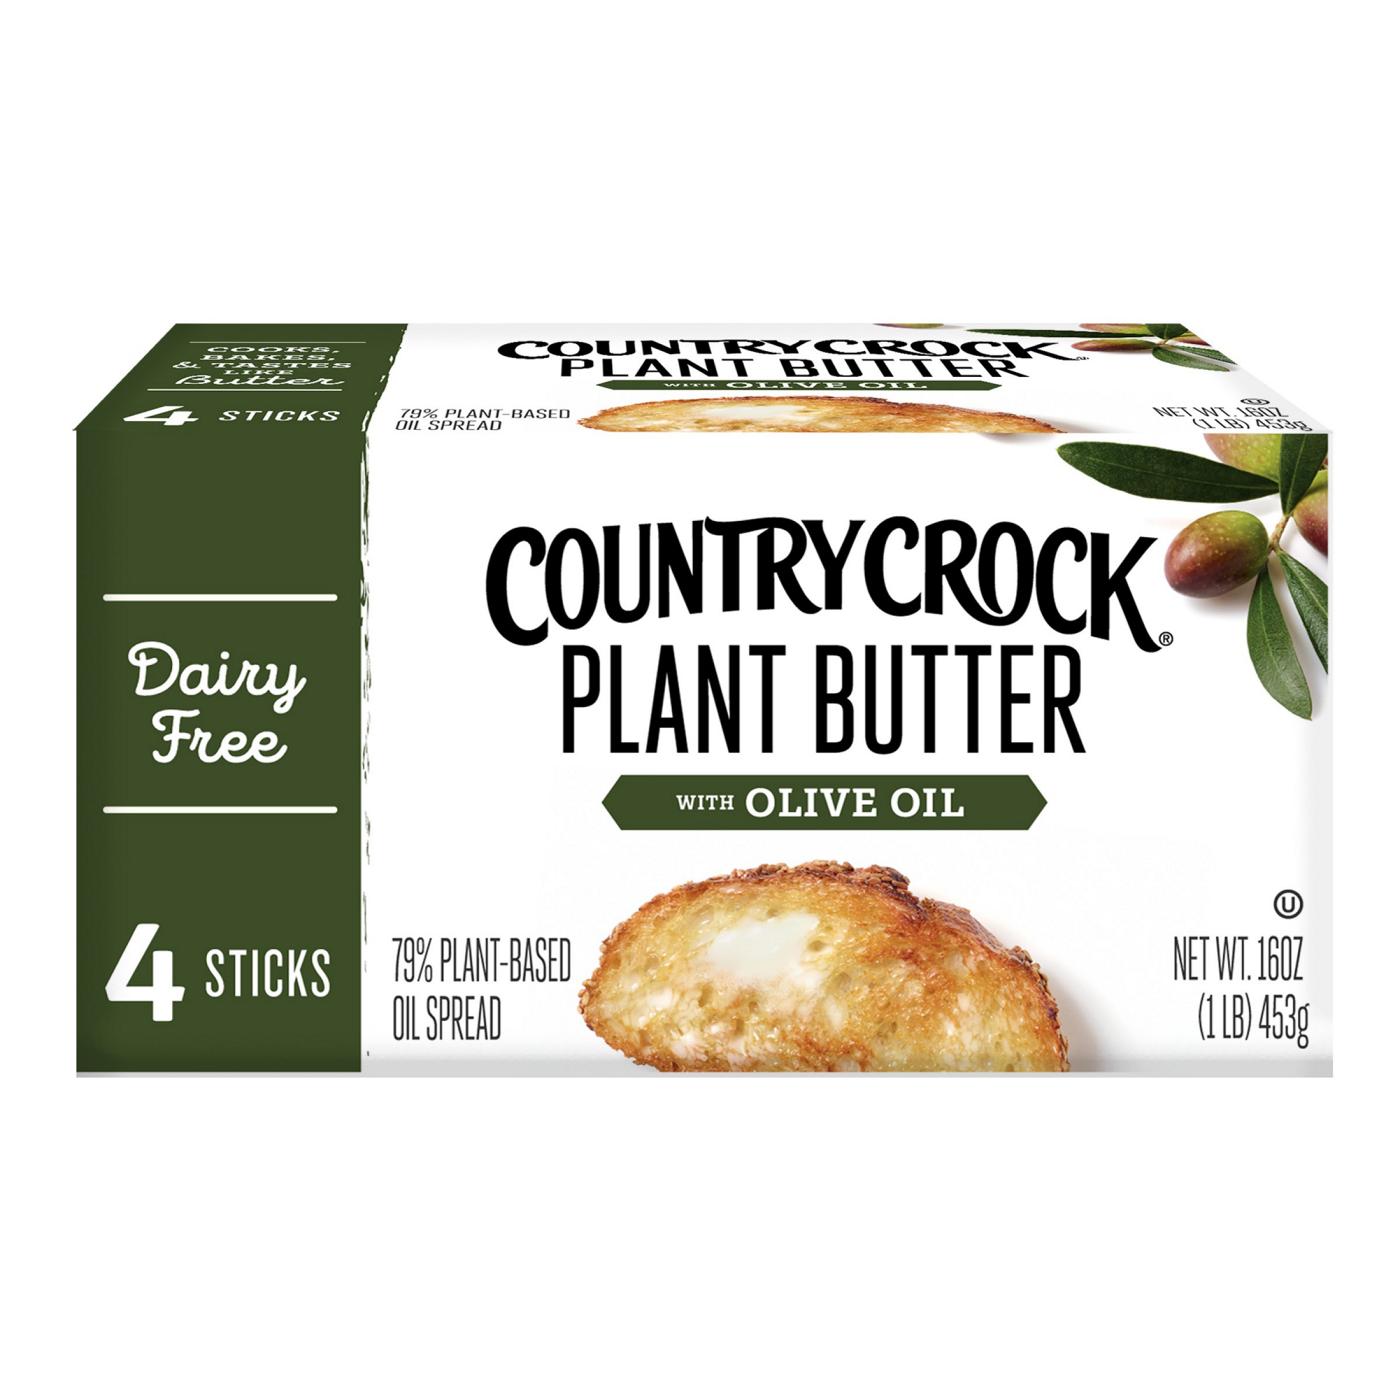 Country Crock Dairy Free Plant Butter with Olive Oil Sticks; image 1 of 9